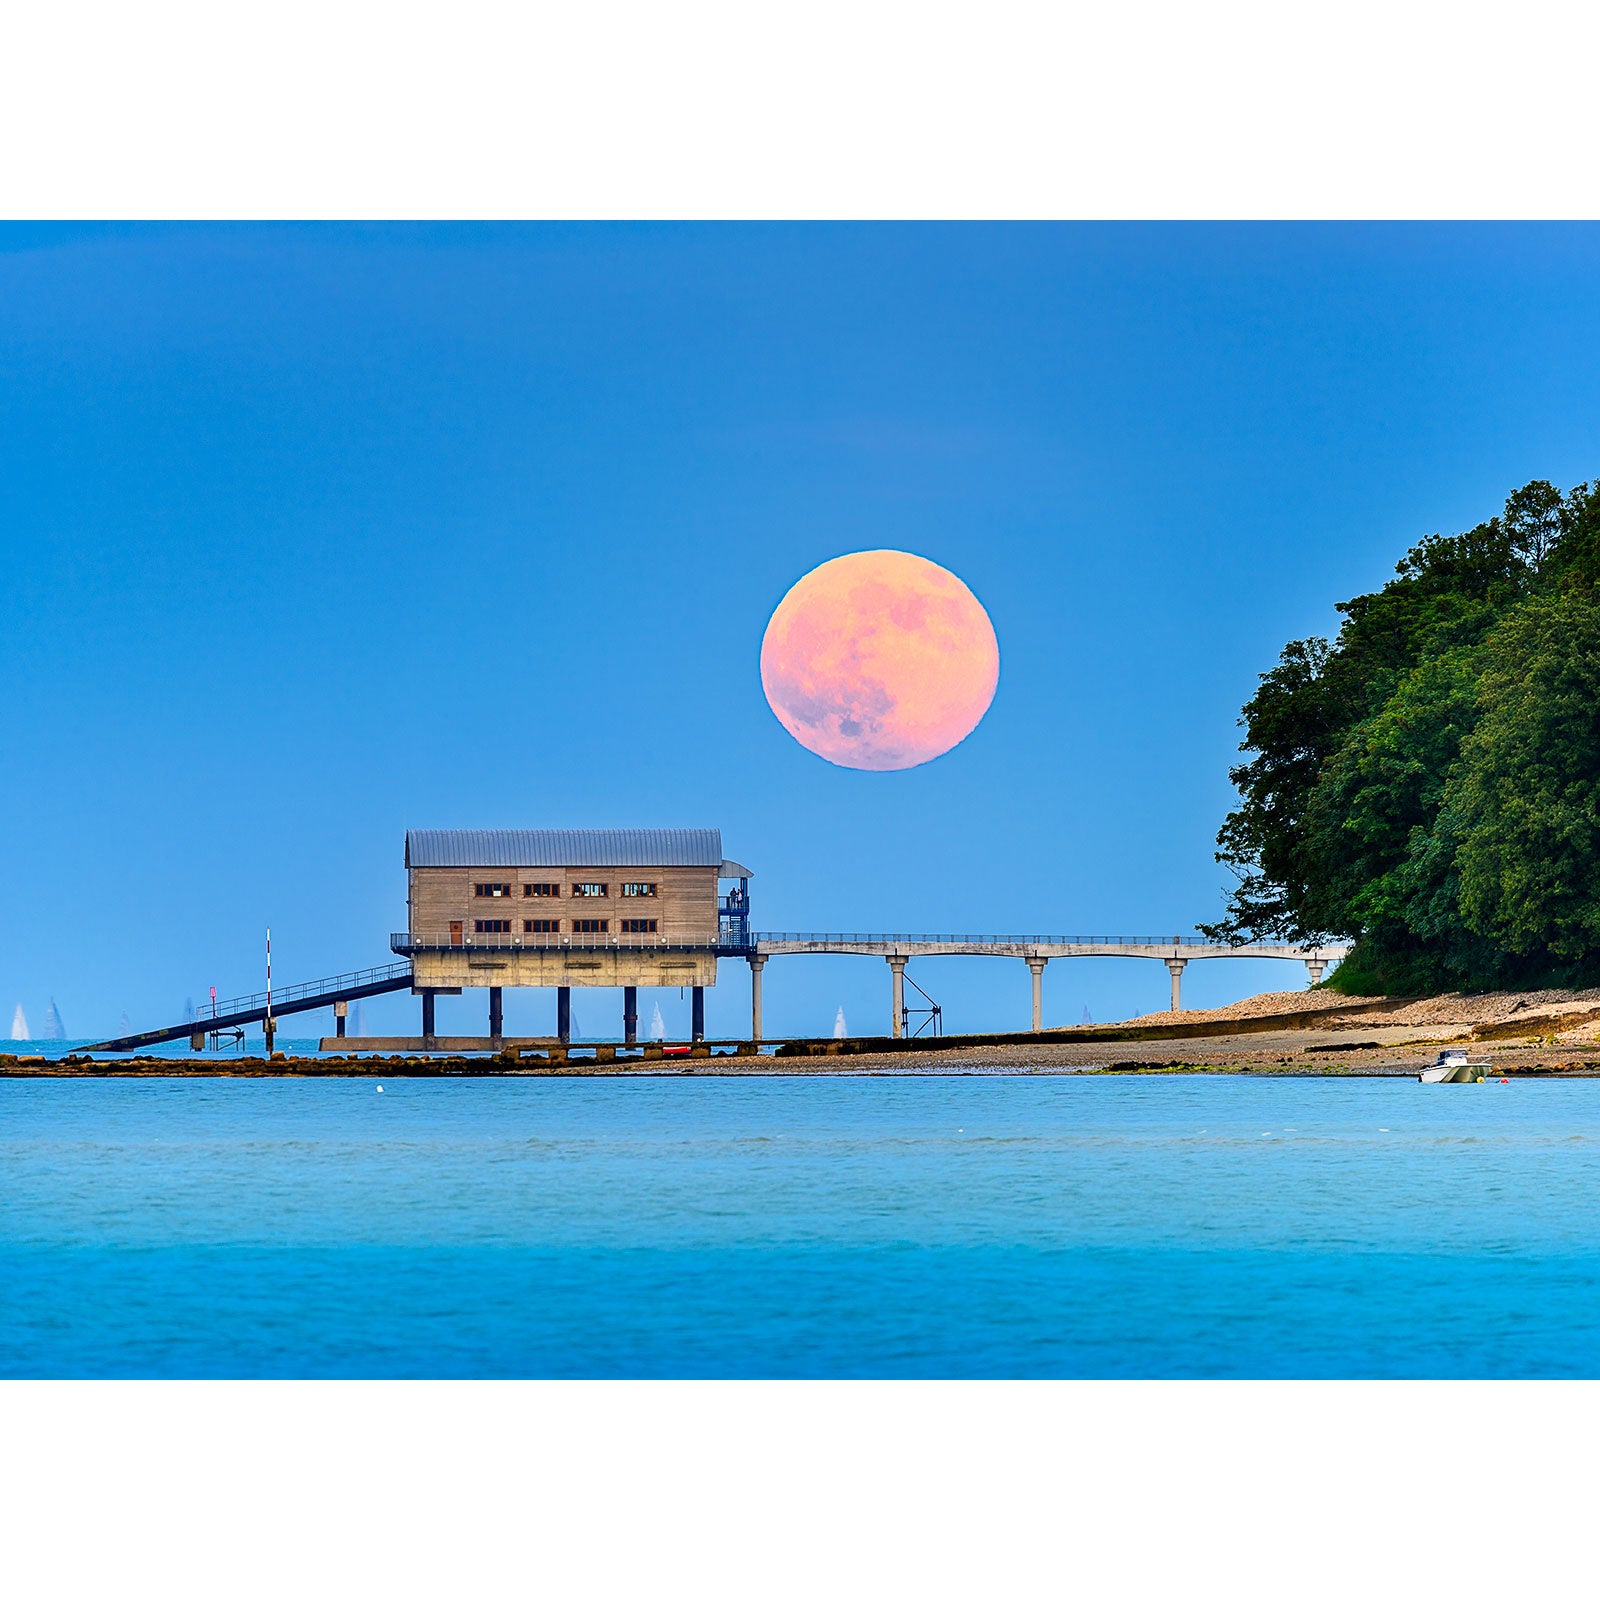 A large, pink-toned Moonrise rising over a coastal structure connected by a pier on Gascoigne Isle, with clear blue skies and trees in the background, captured by Available Light Photography.